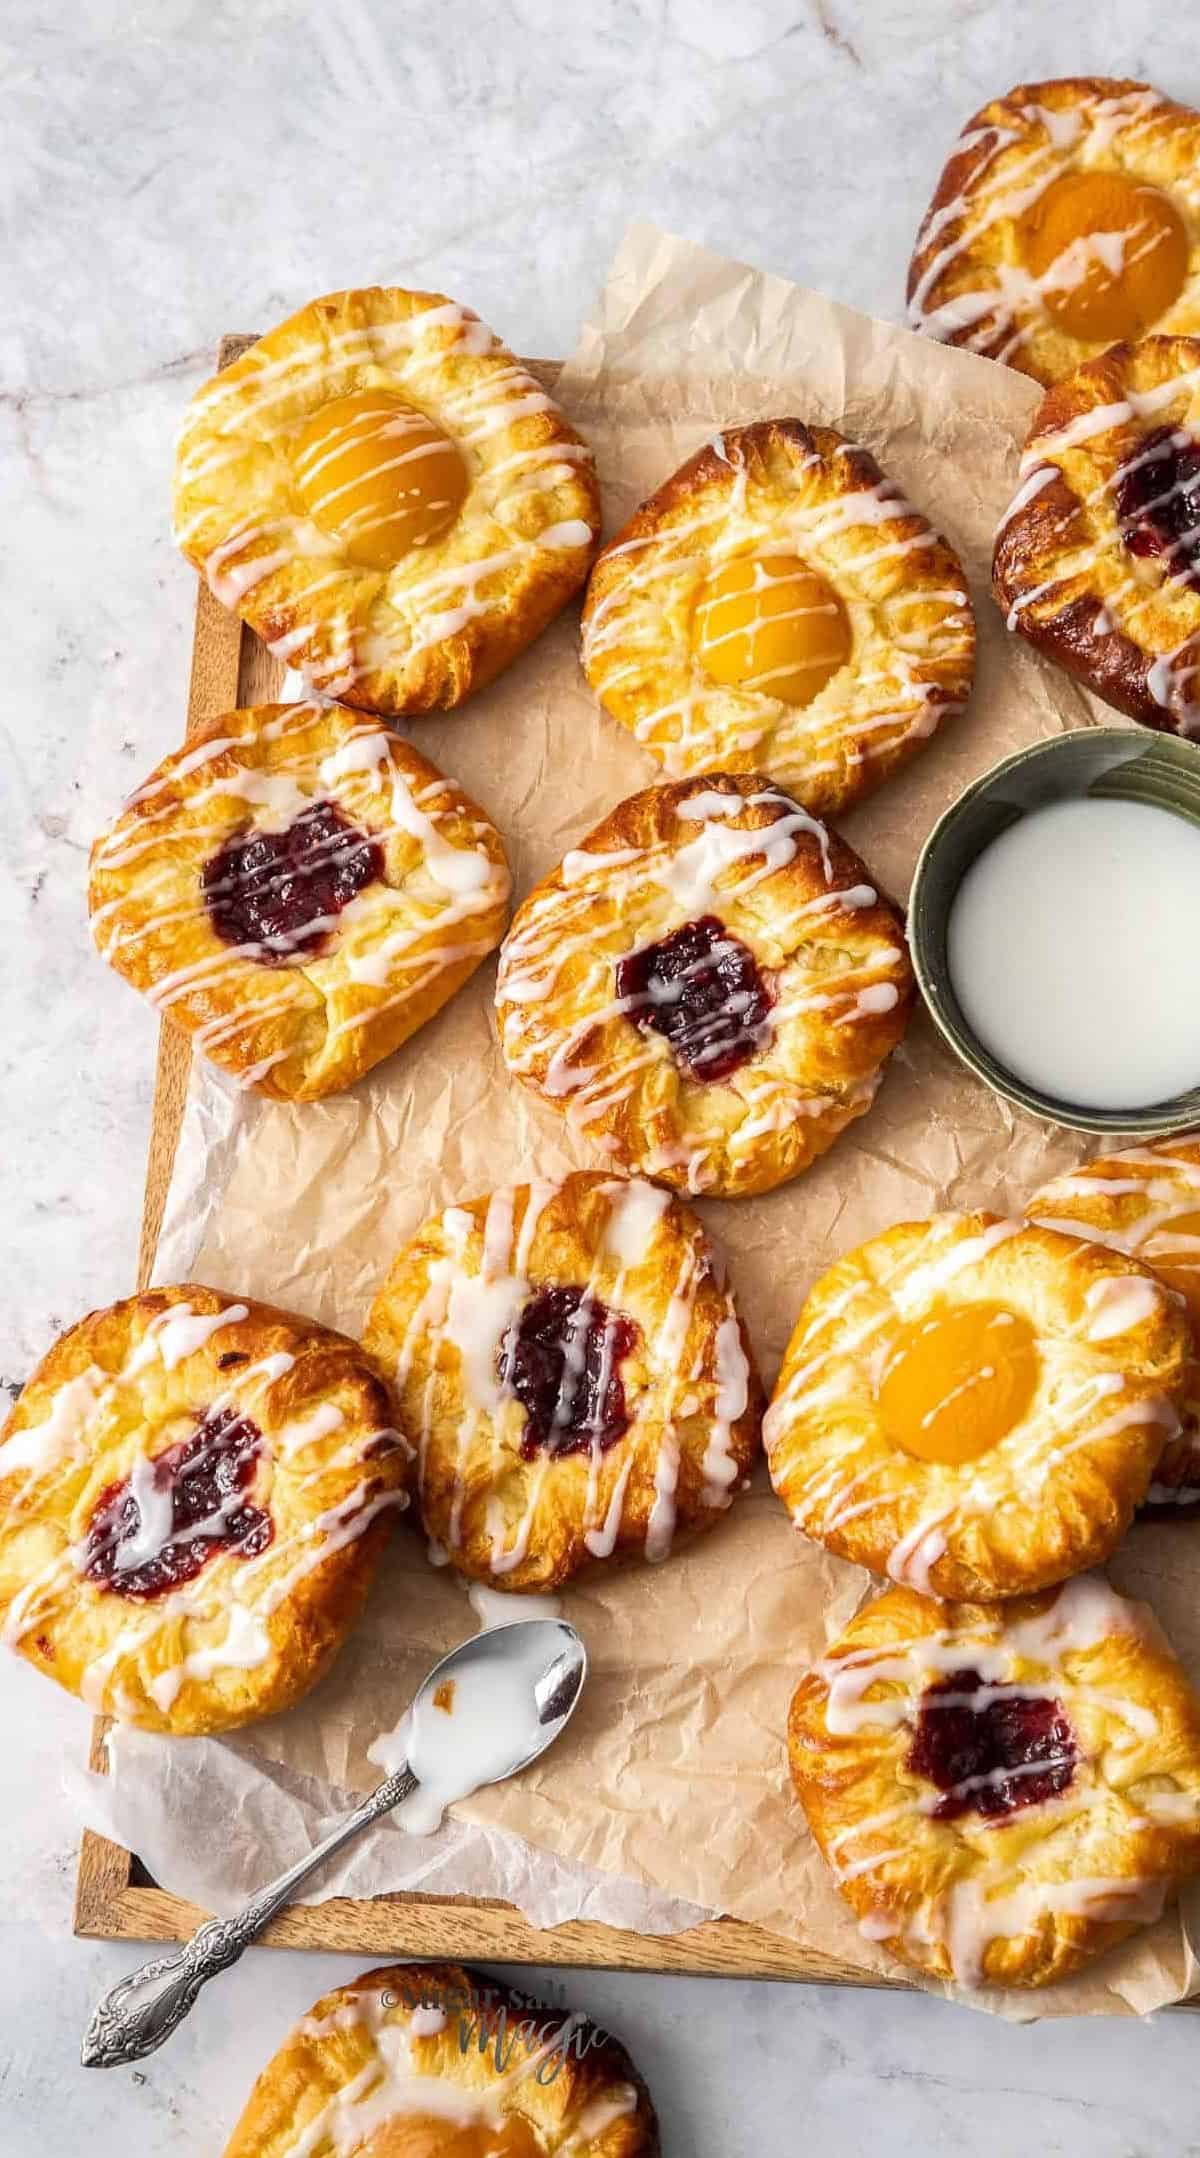  These Danish Pastry Cookies are a scrumptious teatime treat you won't soon forget!